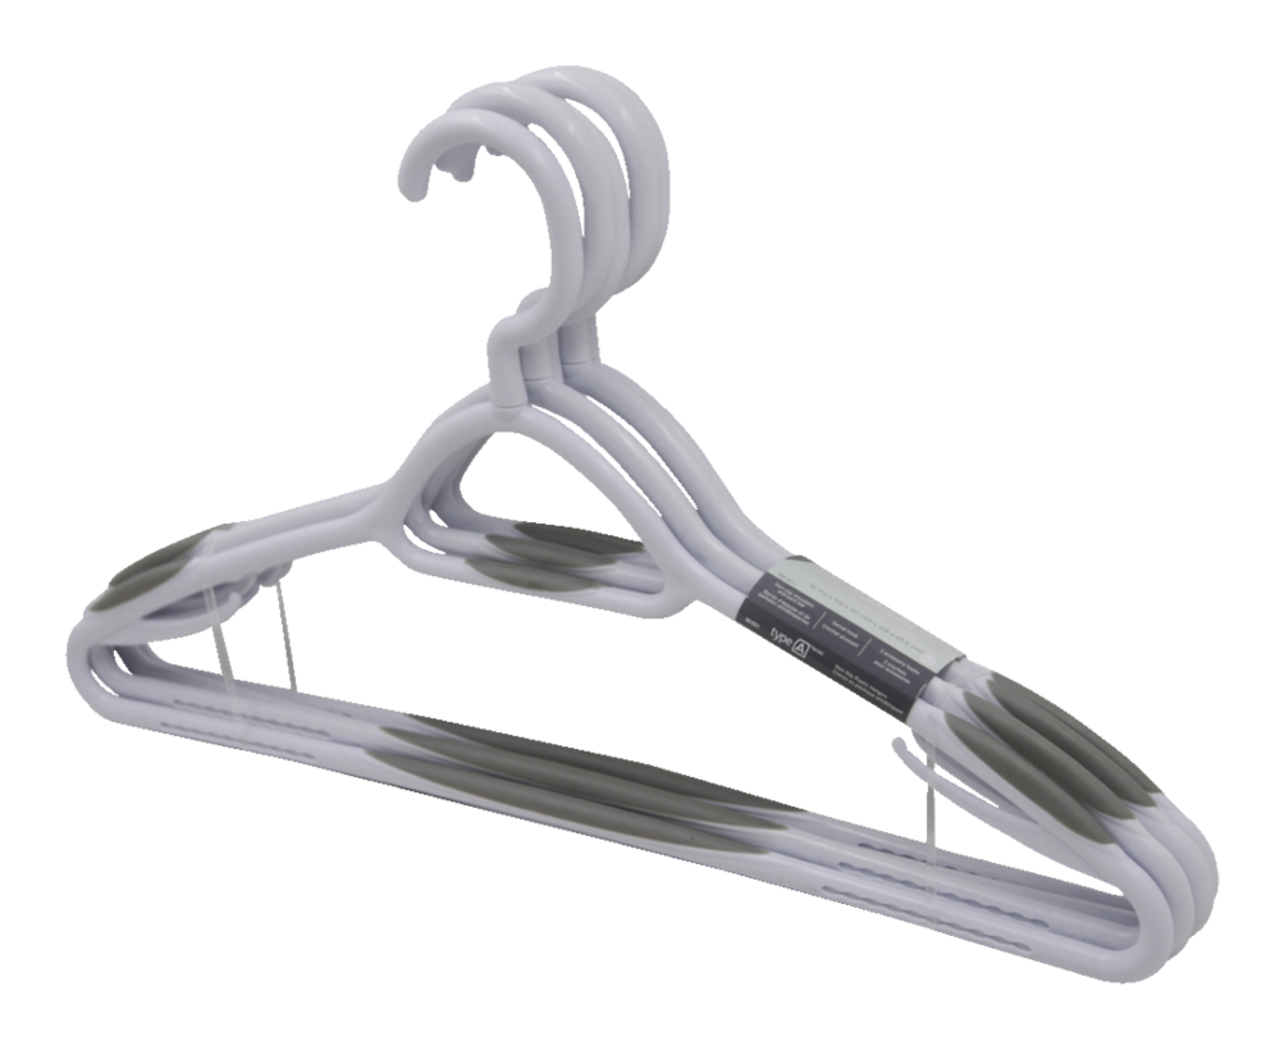 https://media-www.canadiantire.ca/product/living/home-organization/closet-organization/0680121/type-a-5-pack-non-slip-plastic-hanger-9b130845-2830-42d3-a40c-6ee79af7f9a8.png?imdensity=1&imwidth=1244&impolicy=mZoom